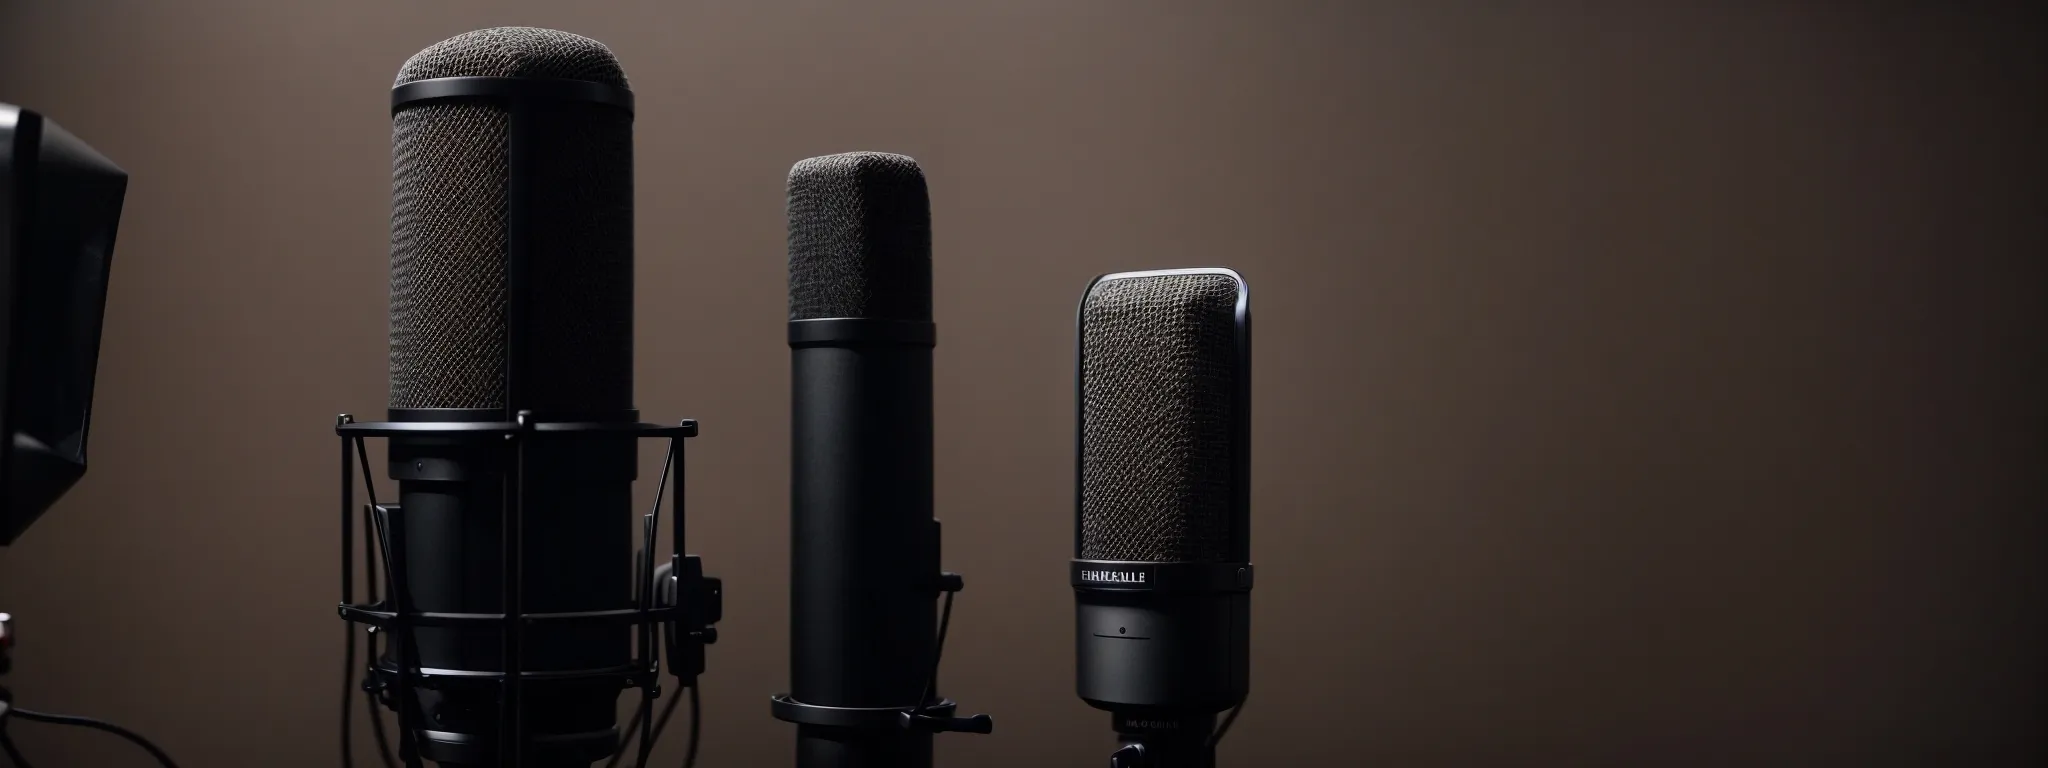 microphones set against a soundproofed studio backdrop, symbolizing the production of a professional podcast.